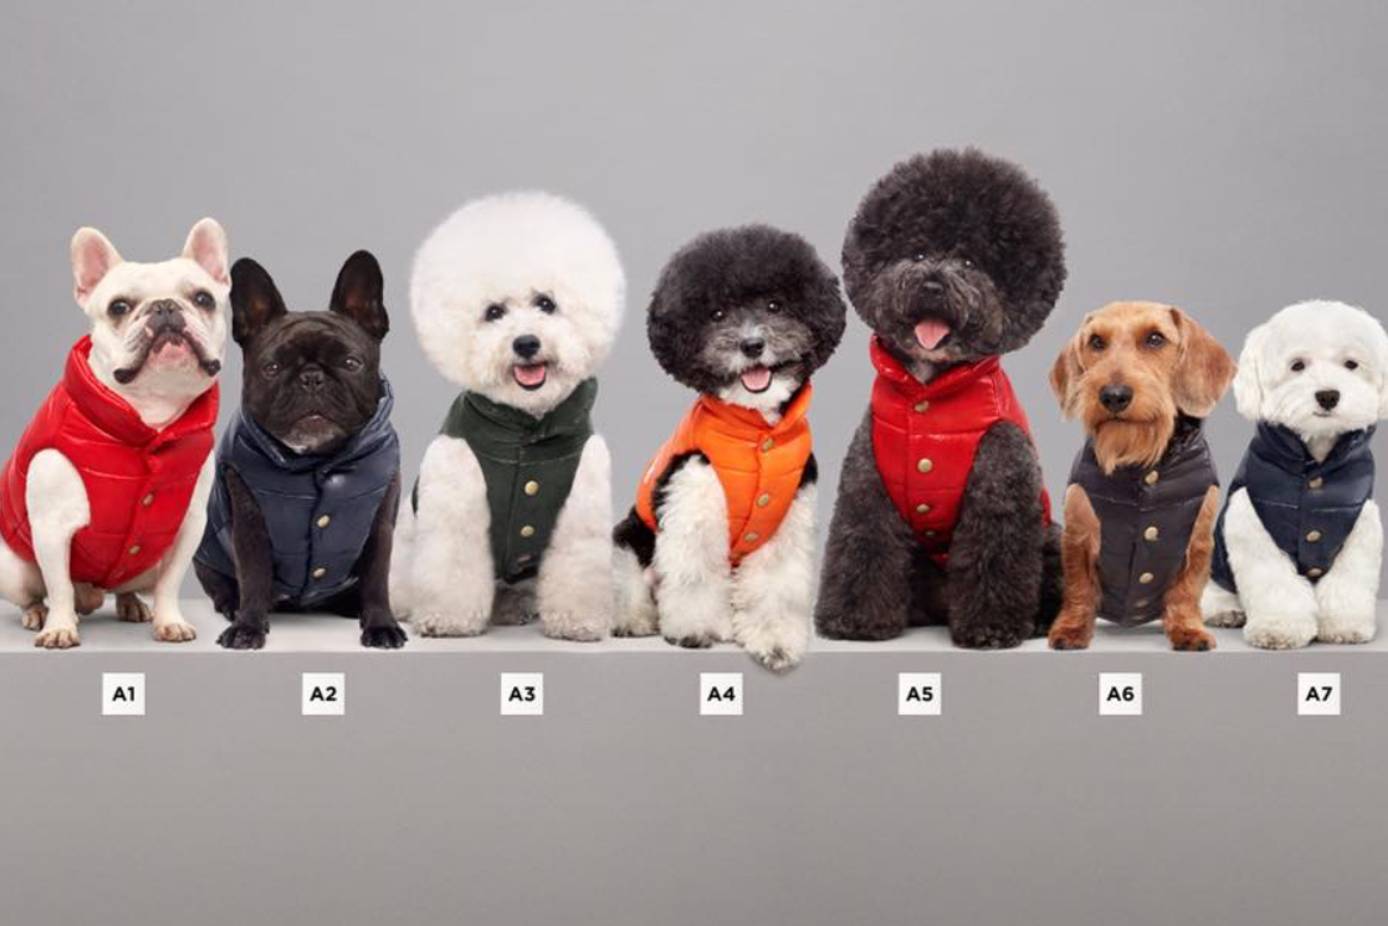 Pet Clothing & Accessories - FARFETCH